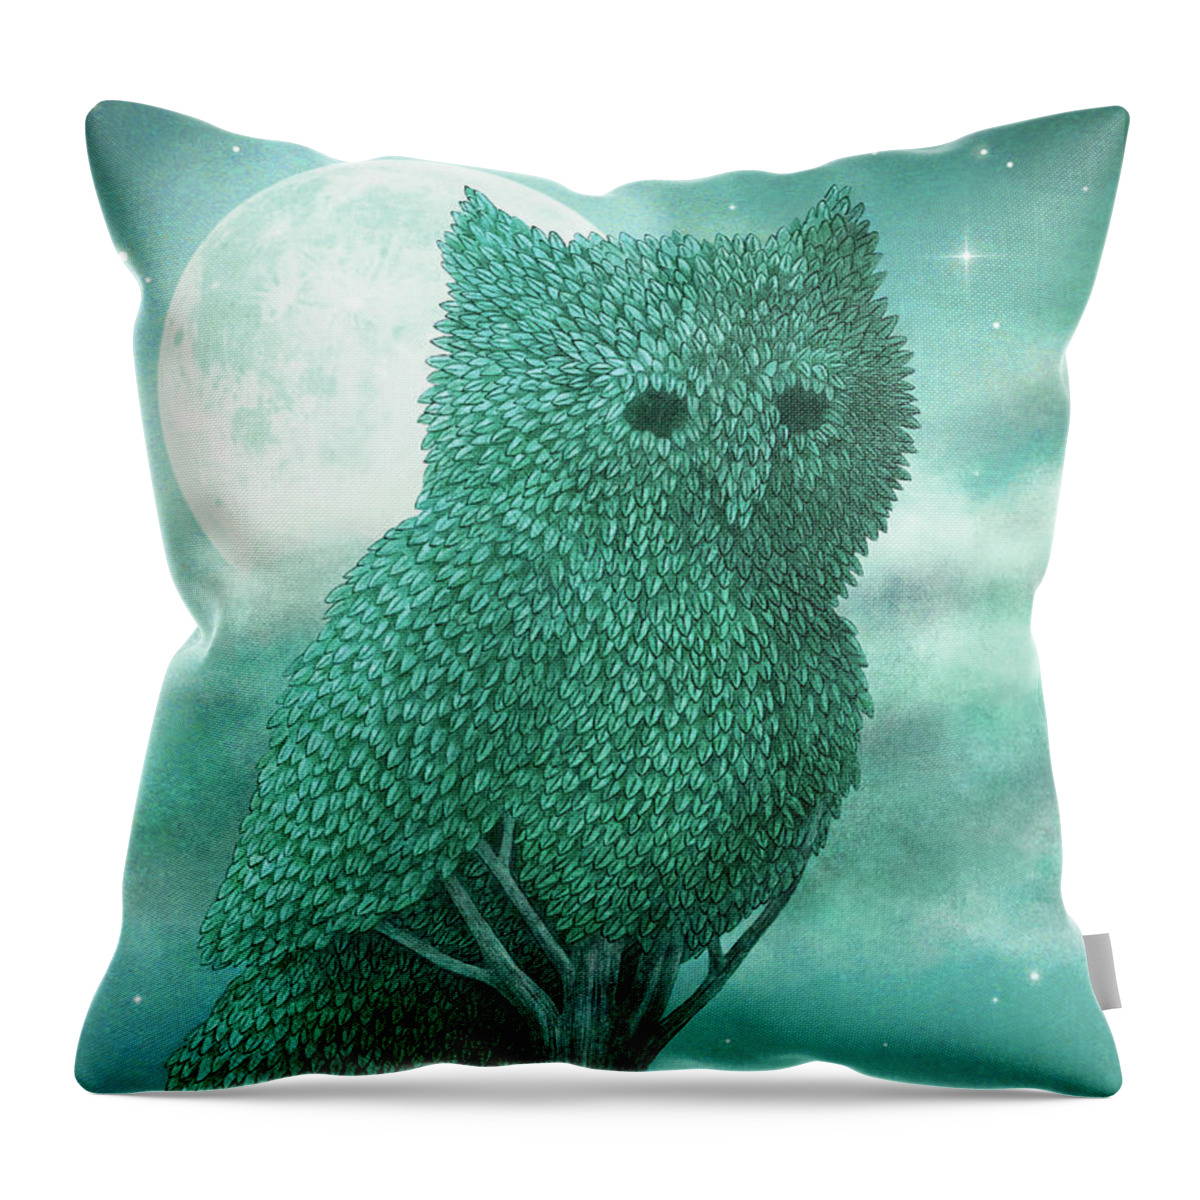 Owl Throw Pillow featuring the drawing The Night Gardener by Eric Fan